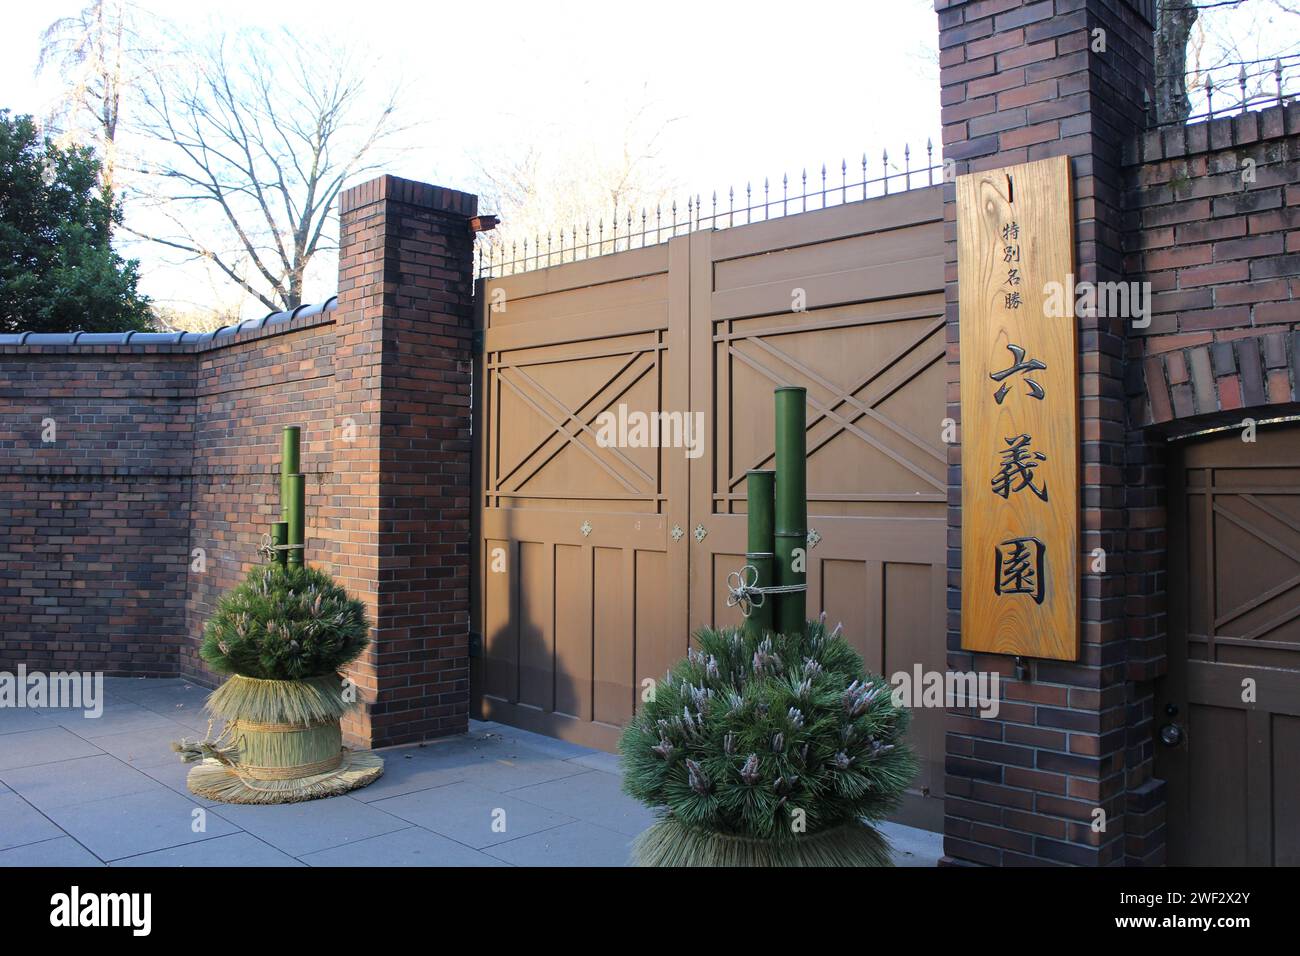 Main gate and new year decorations in Rikugien Garden, Tokyo, Japan (Japanese words mean the name of garden "Rikugien") Stock Photo